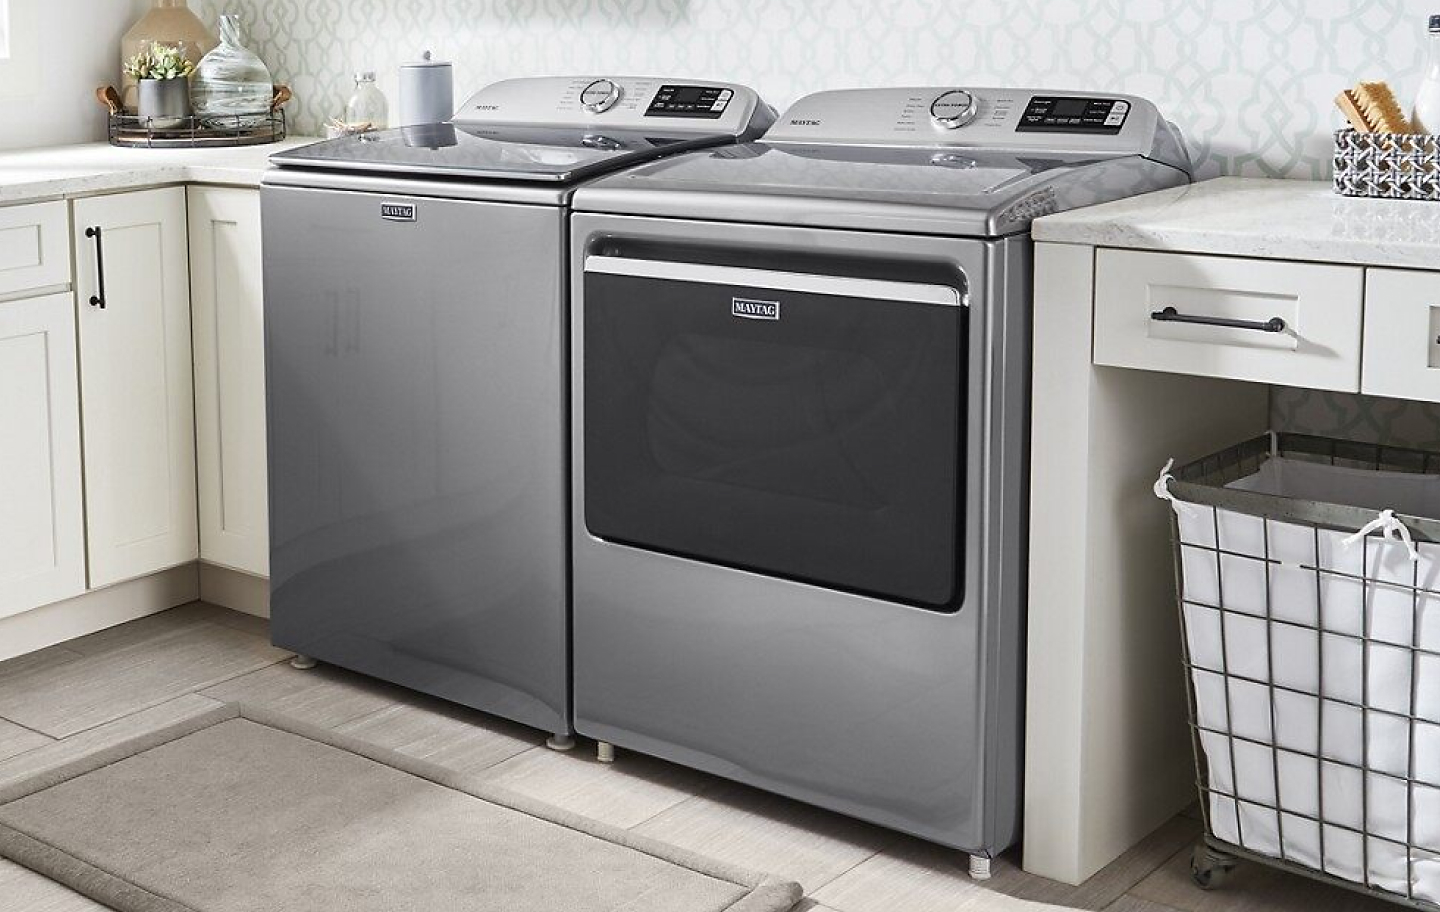 Gray Maytag® top-load washer and dryer pair.